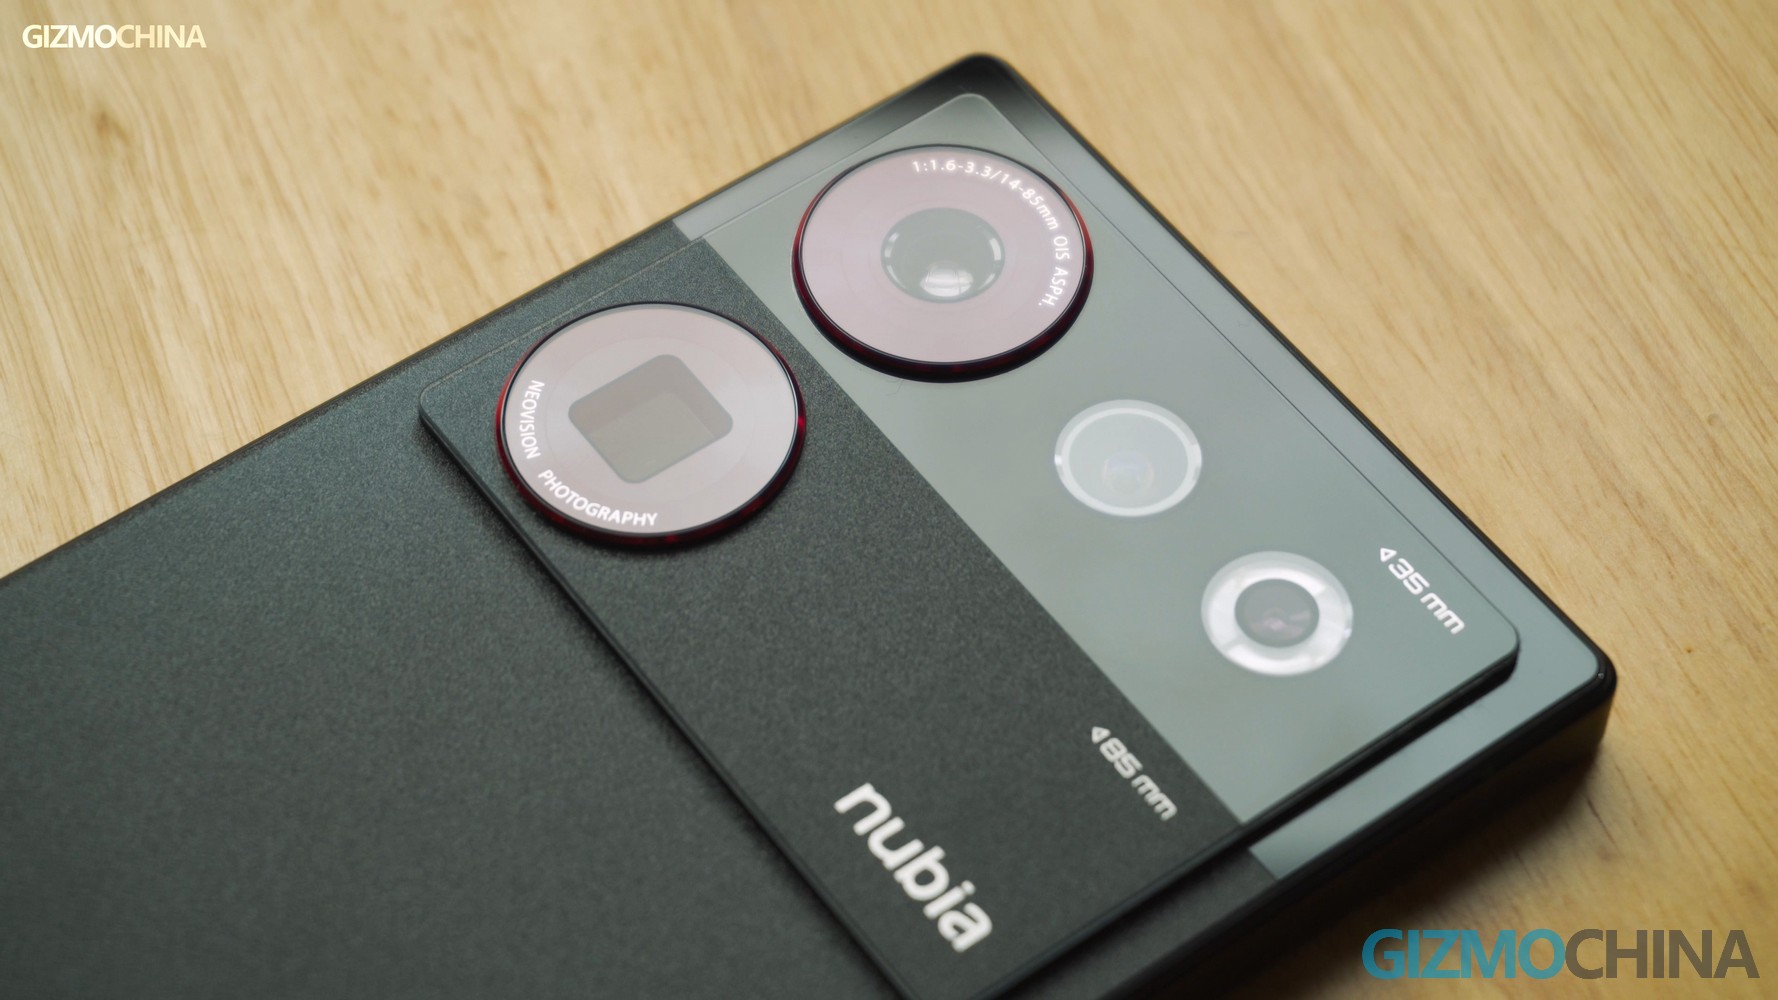 The Nubia Z50 Ultra gives new meaning to notchless displays, but